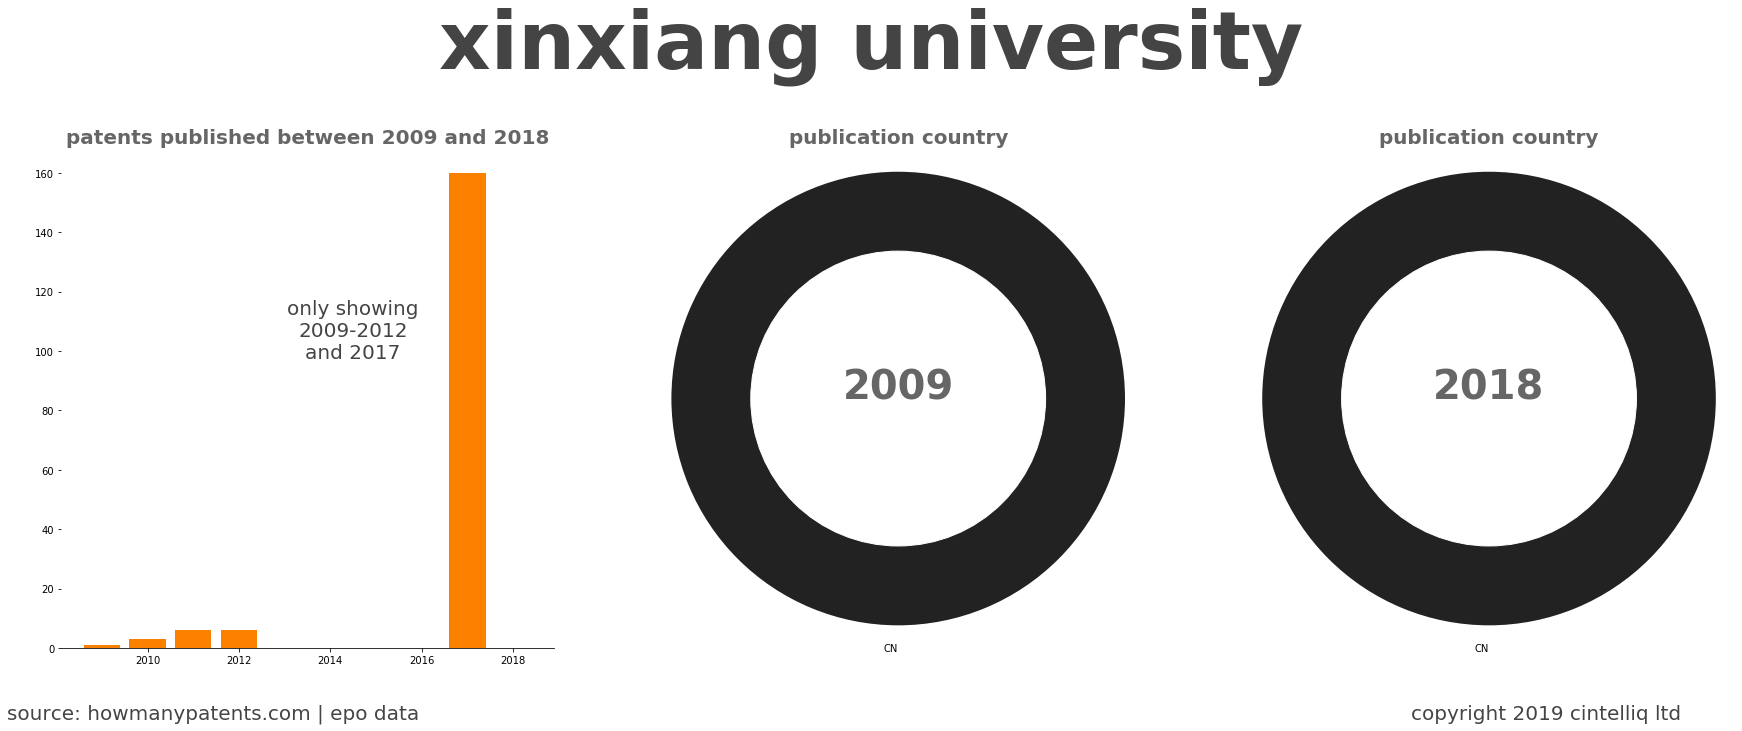 summary of patents for Xinxiang University